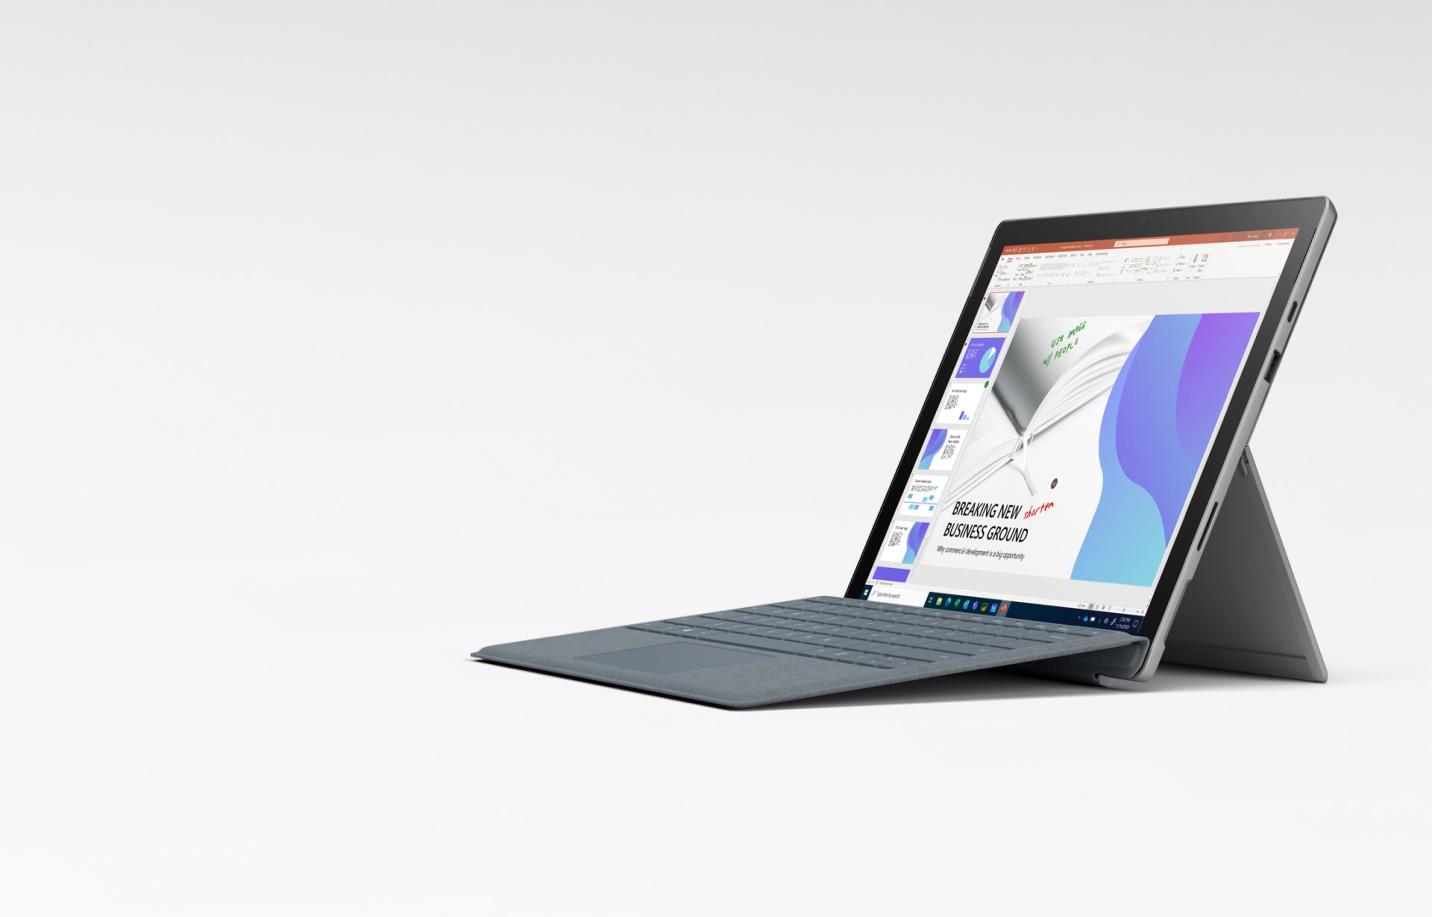 Surface Pro 7+: Portable 2-in-1 Business Laptop - Microsoft Surface for  Business